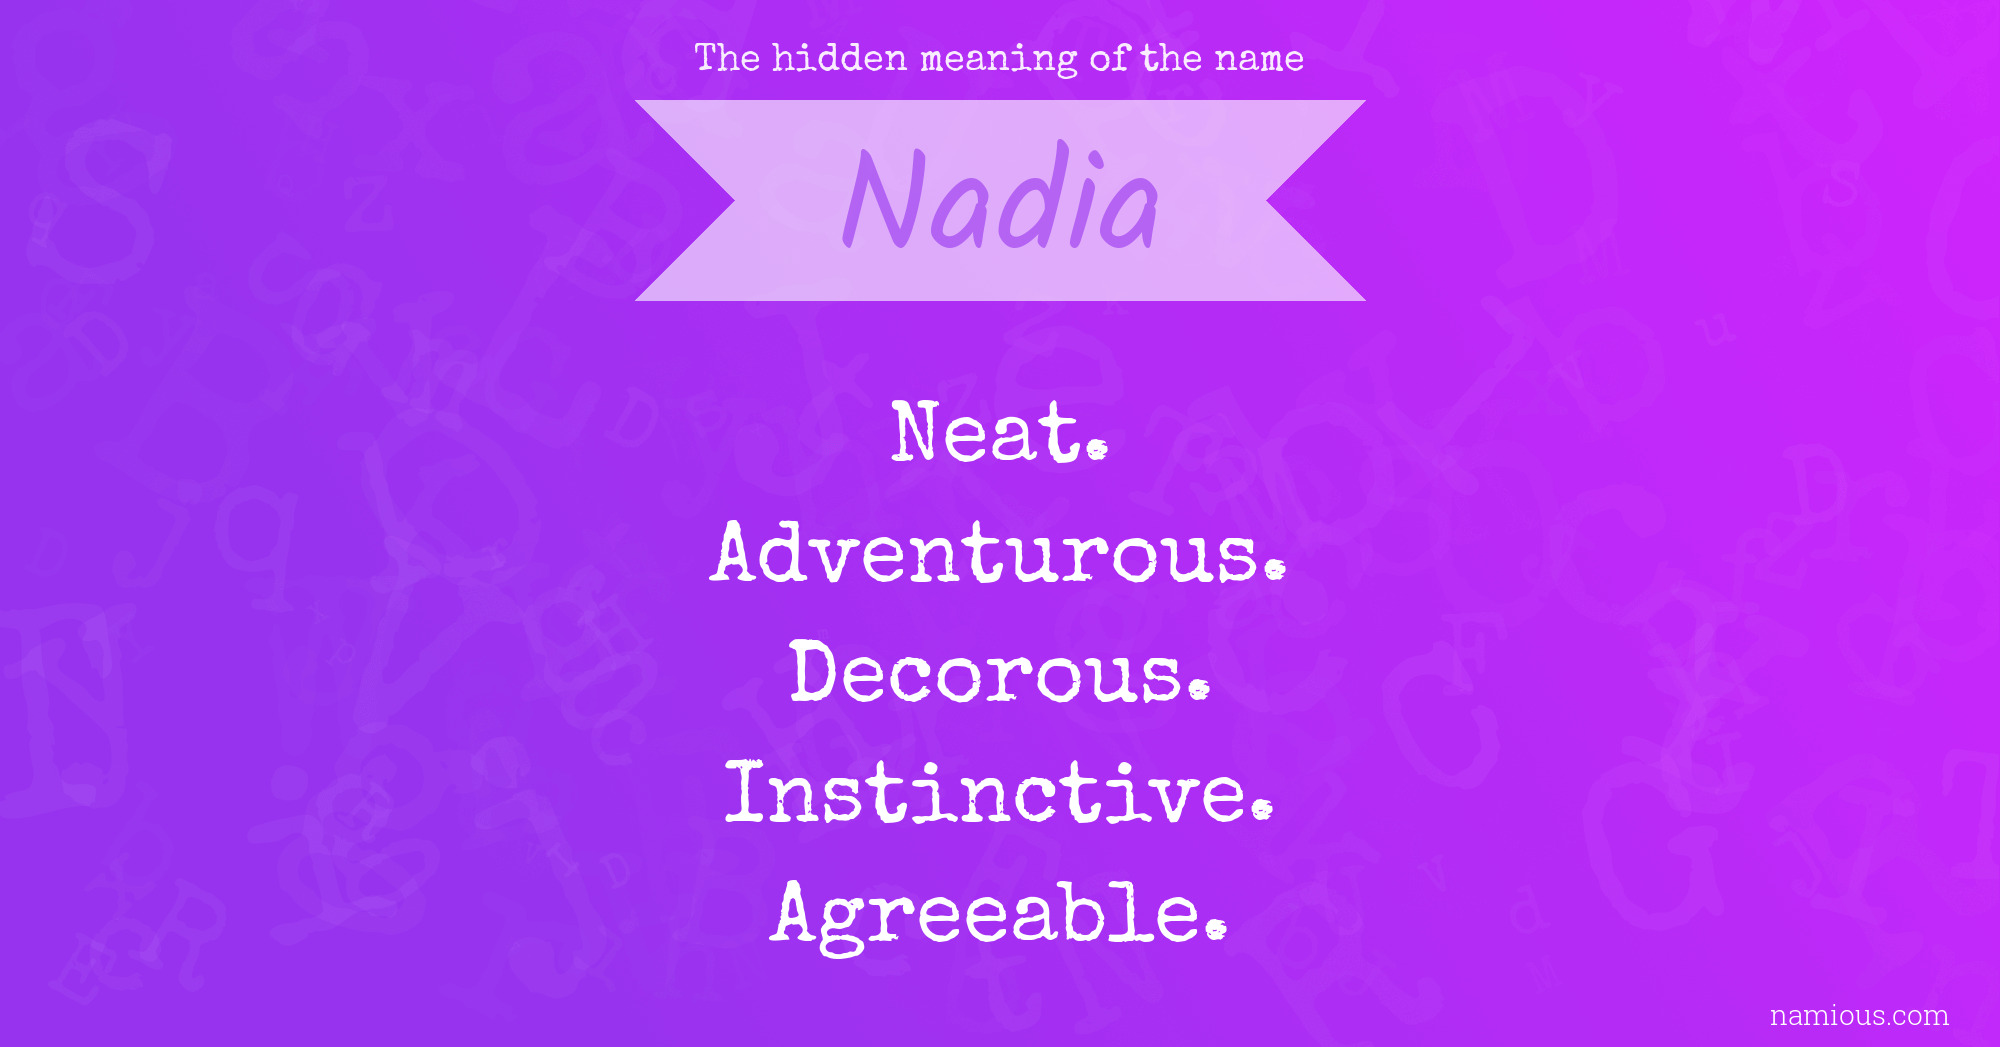 The hidden meaning of the name Nadia